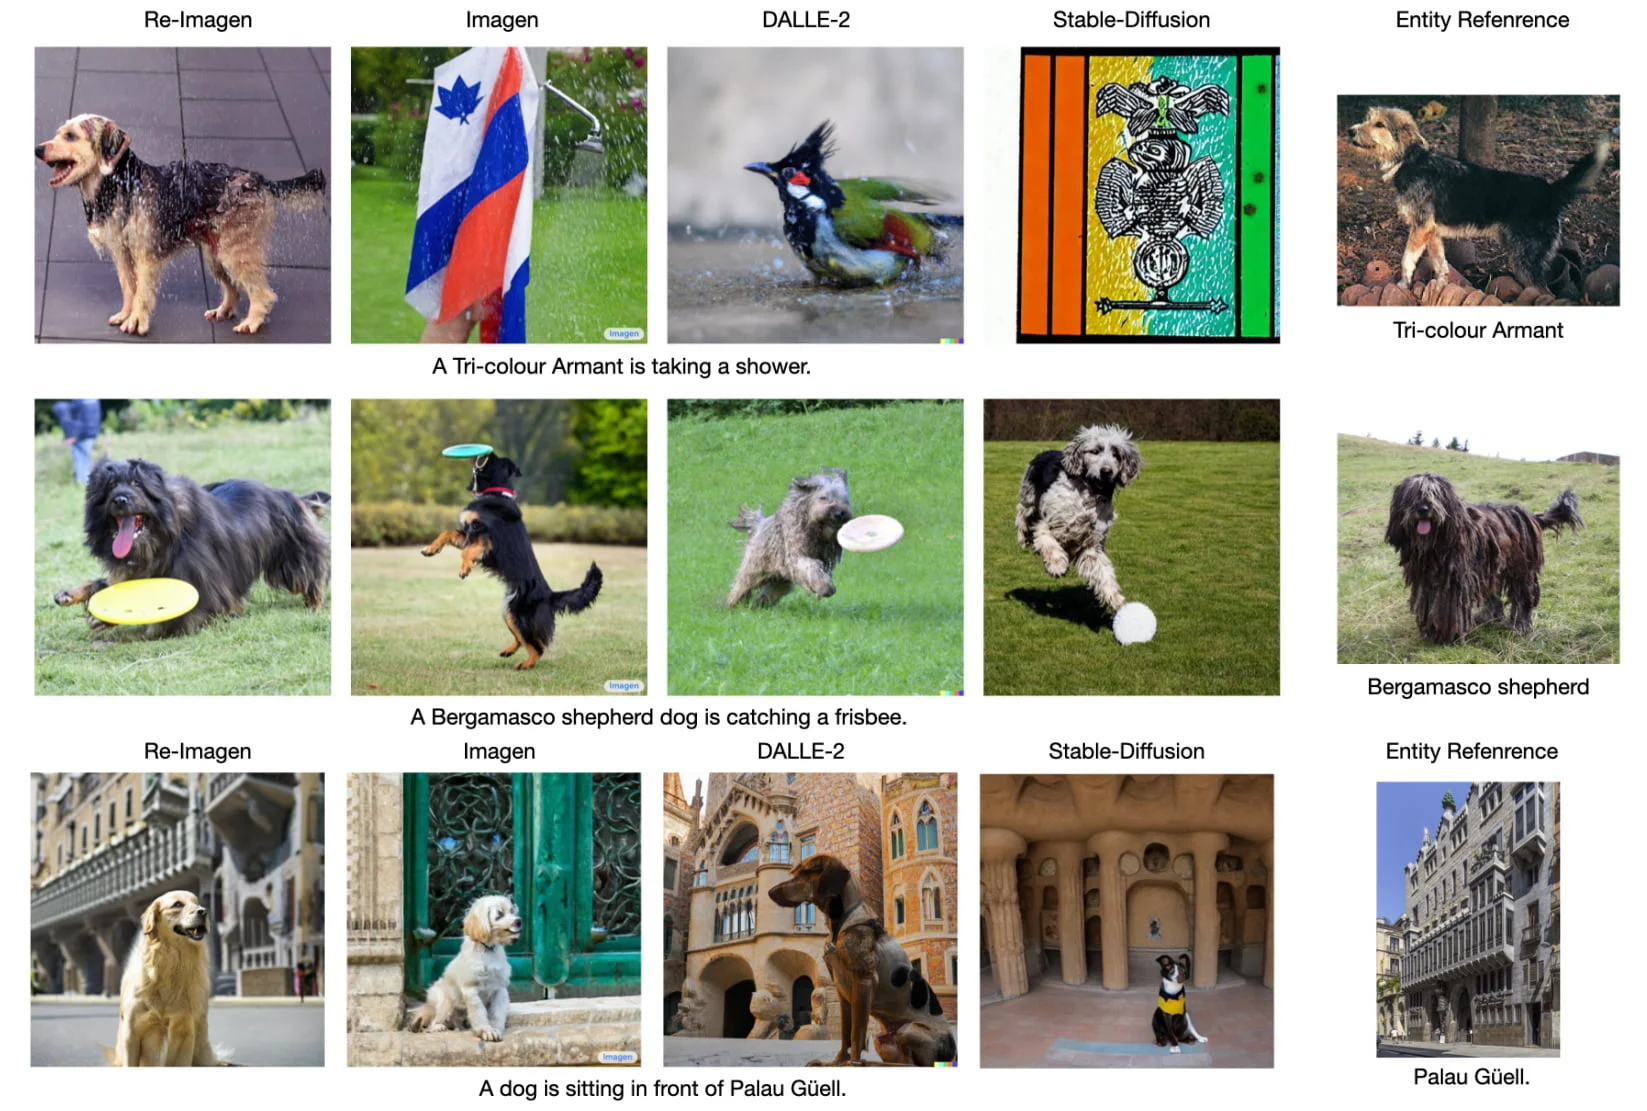 Google's Re-Imagen could set new quality standards for AI images